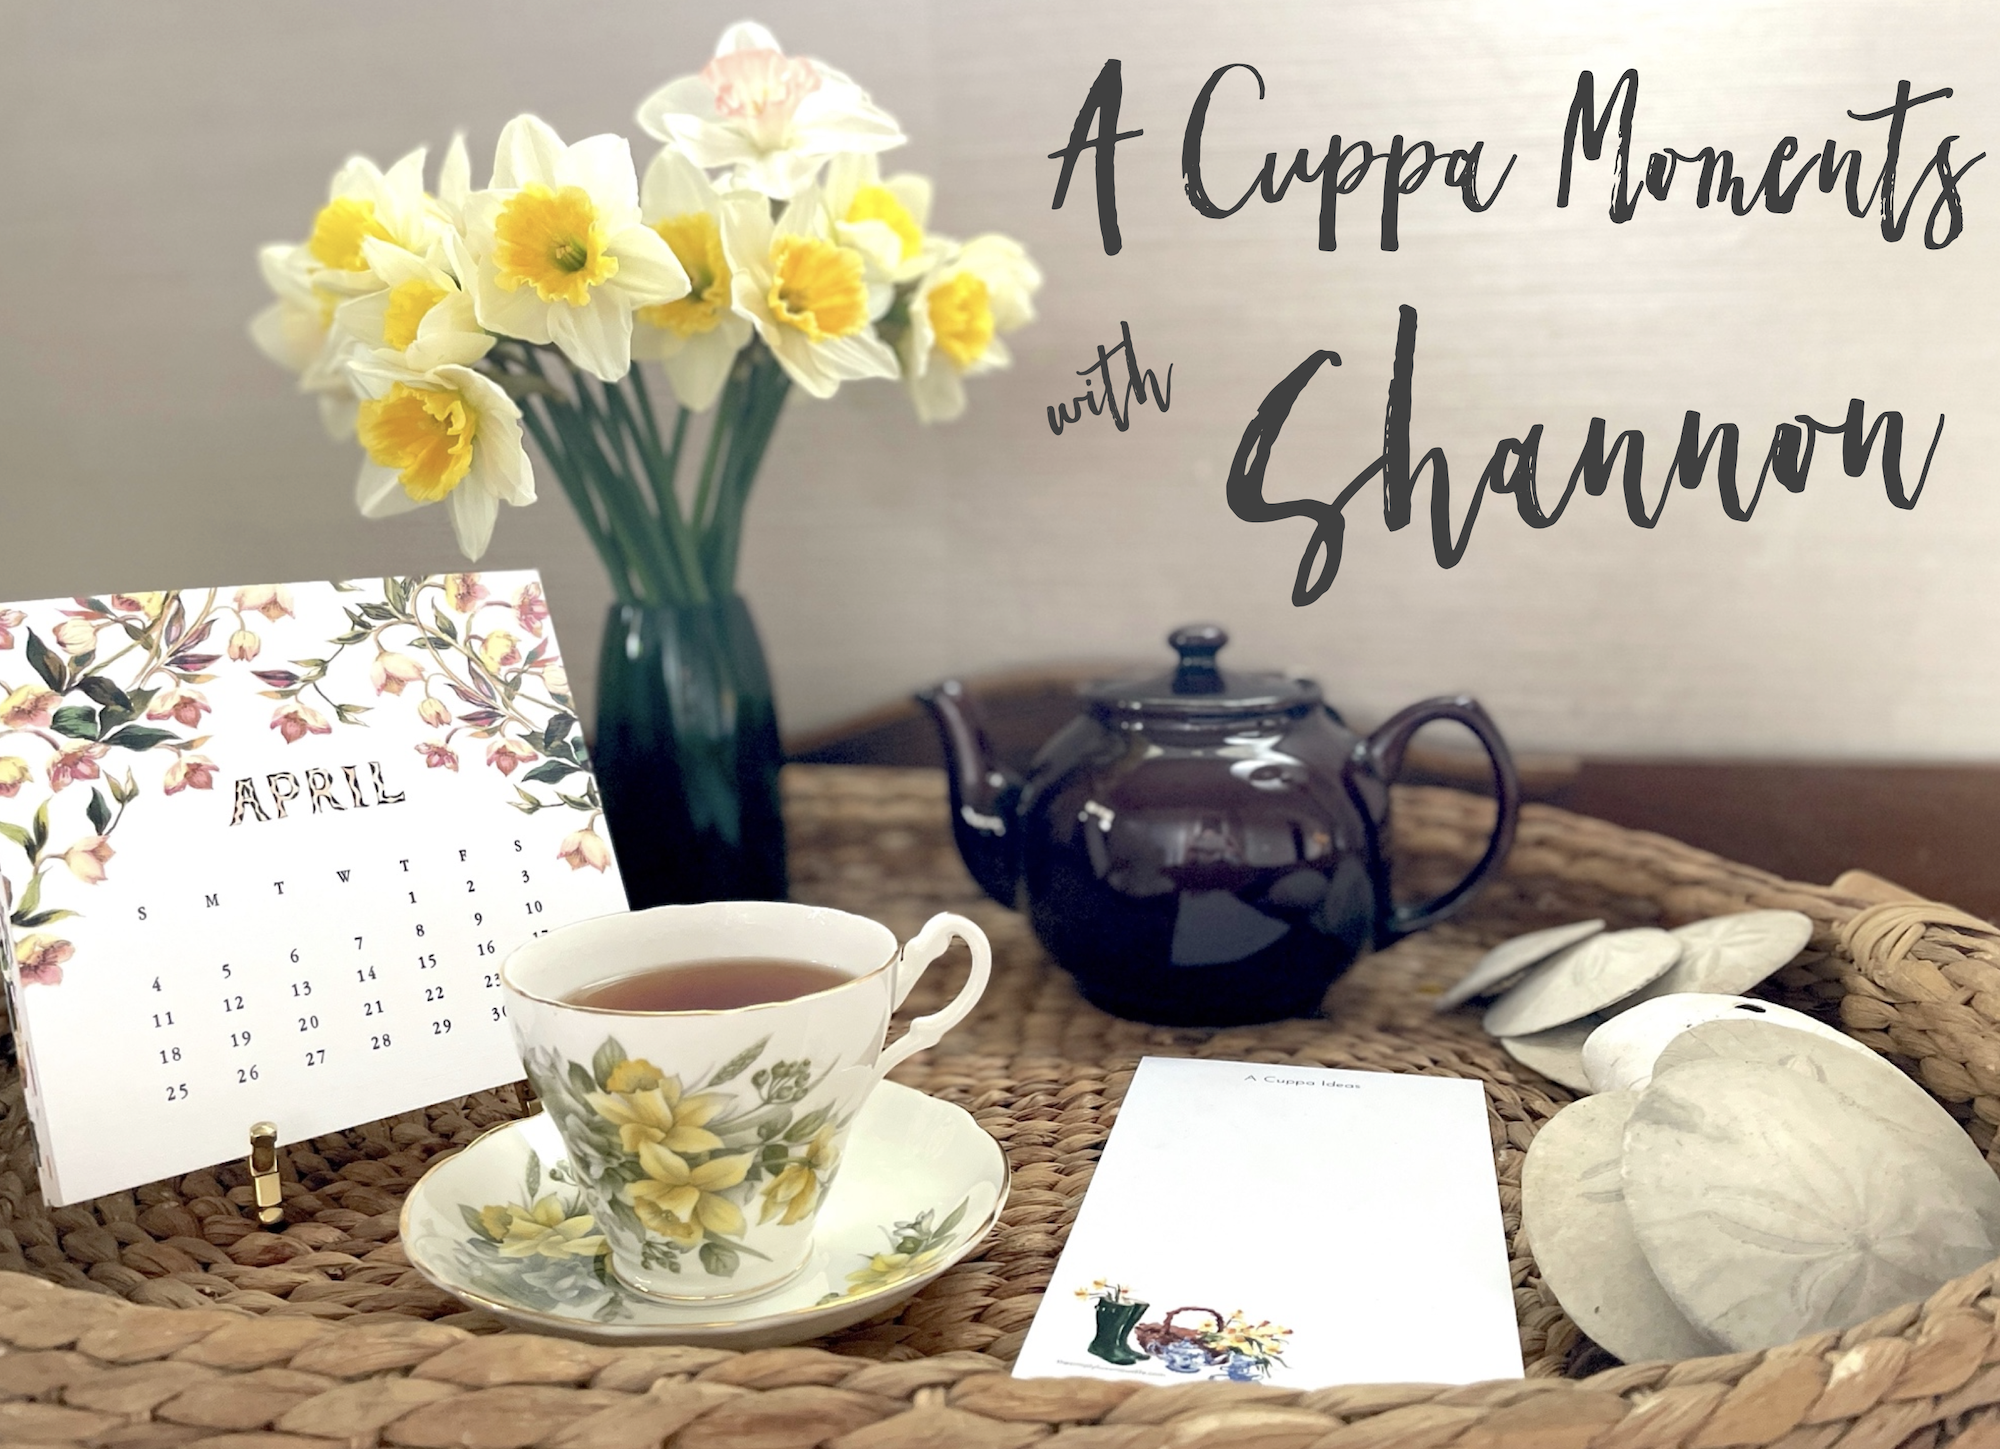 A Cuppa Moments w/Shannon – April 2021